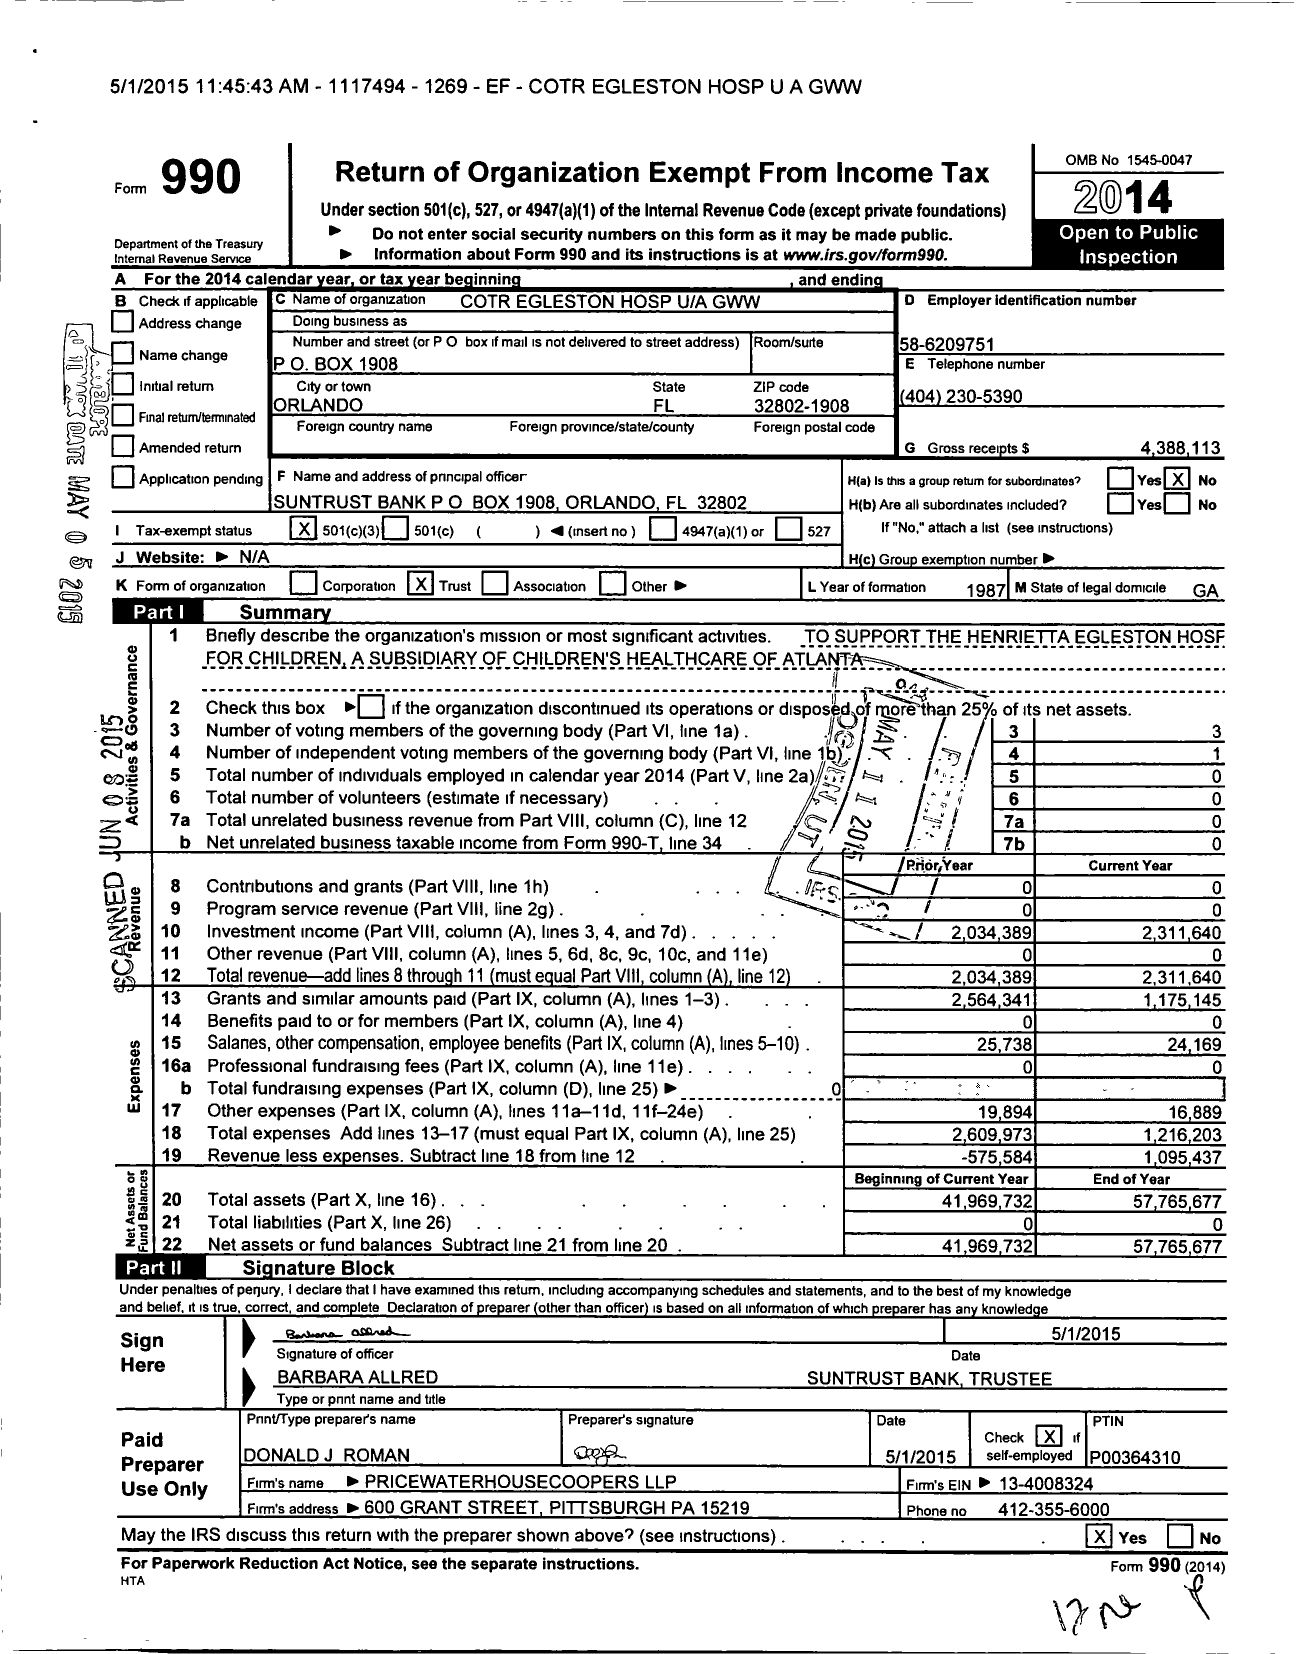 Image of first page of 2014 Form 990 for Cotr Egleston Hospital GWW